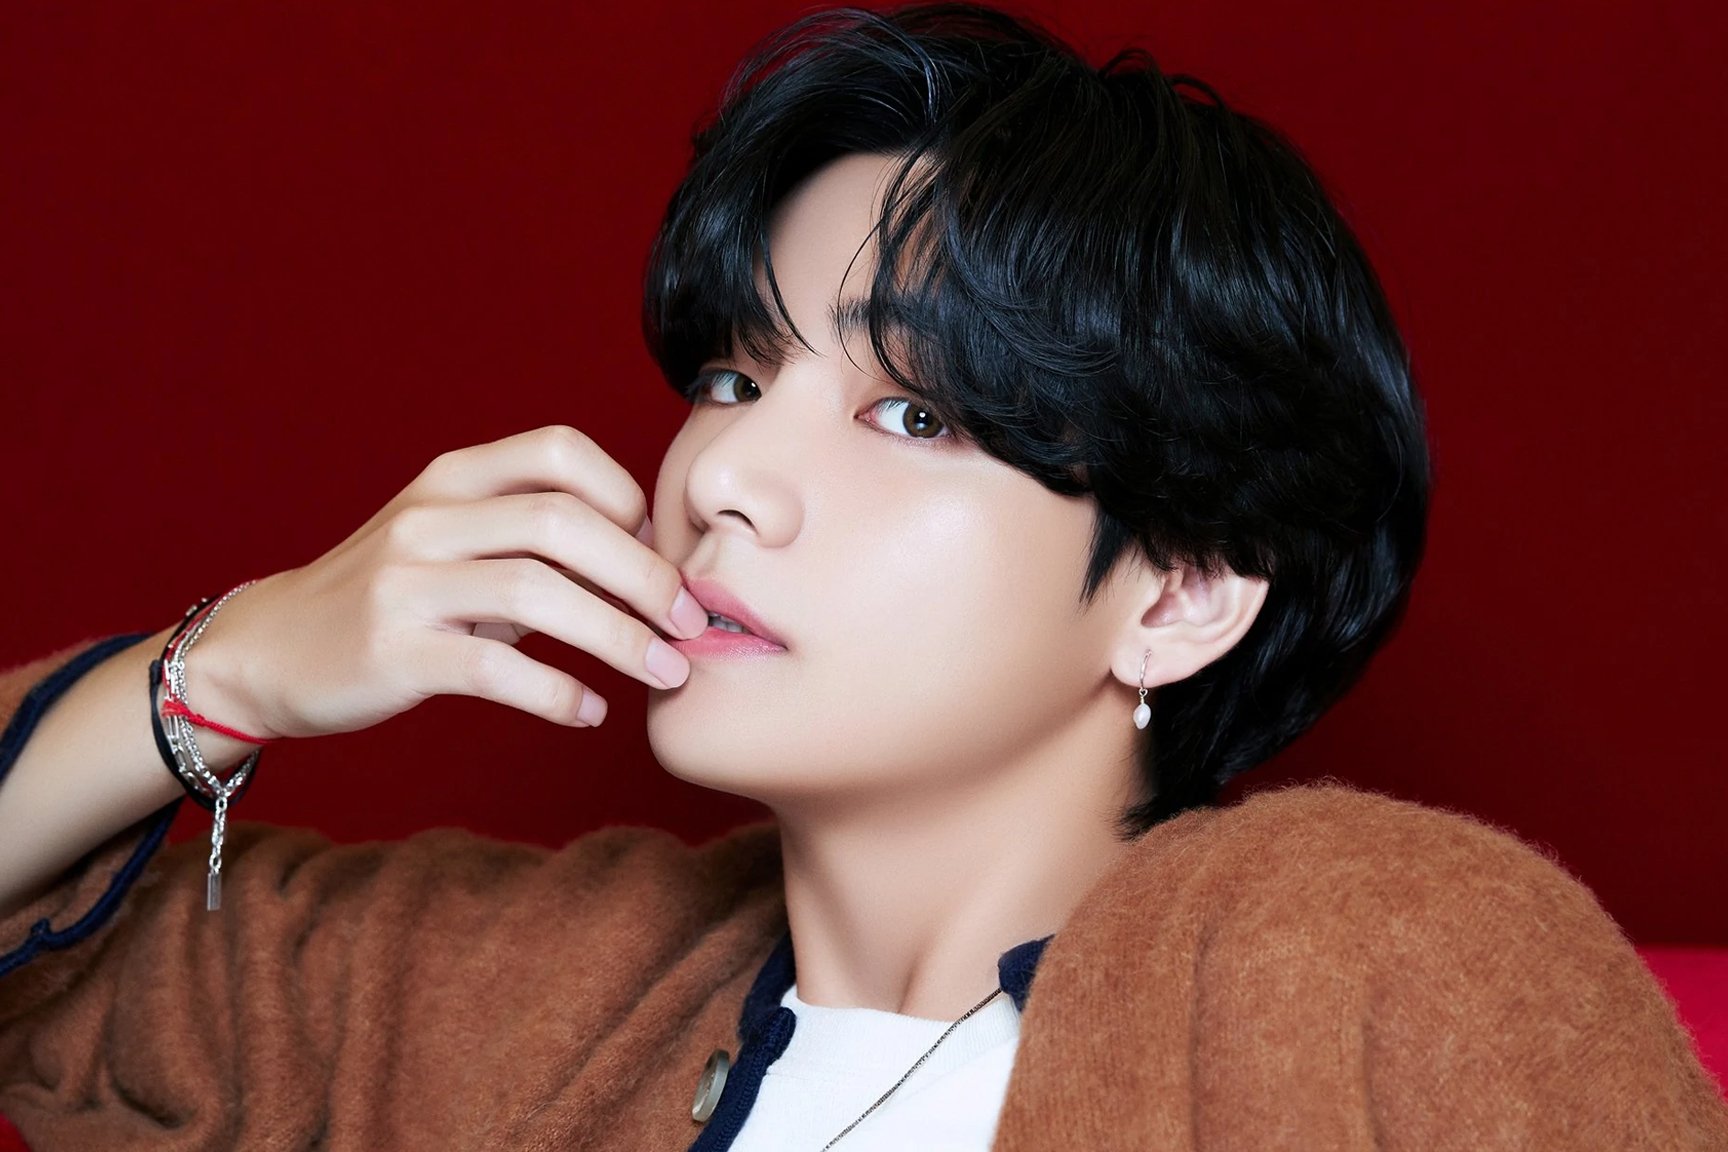 Celine Boy Taehyung”: BTS singer sends fans into a frenzy as he